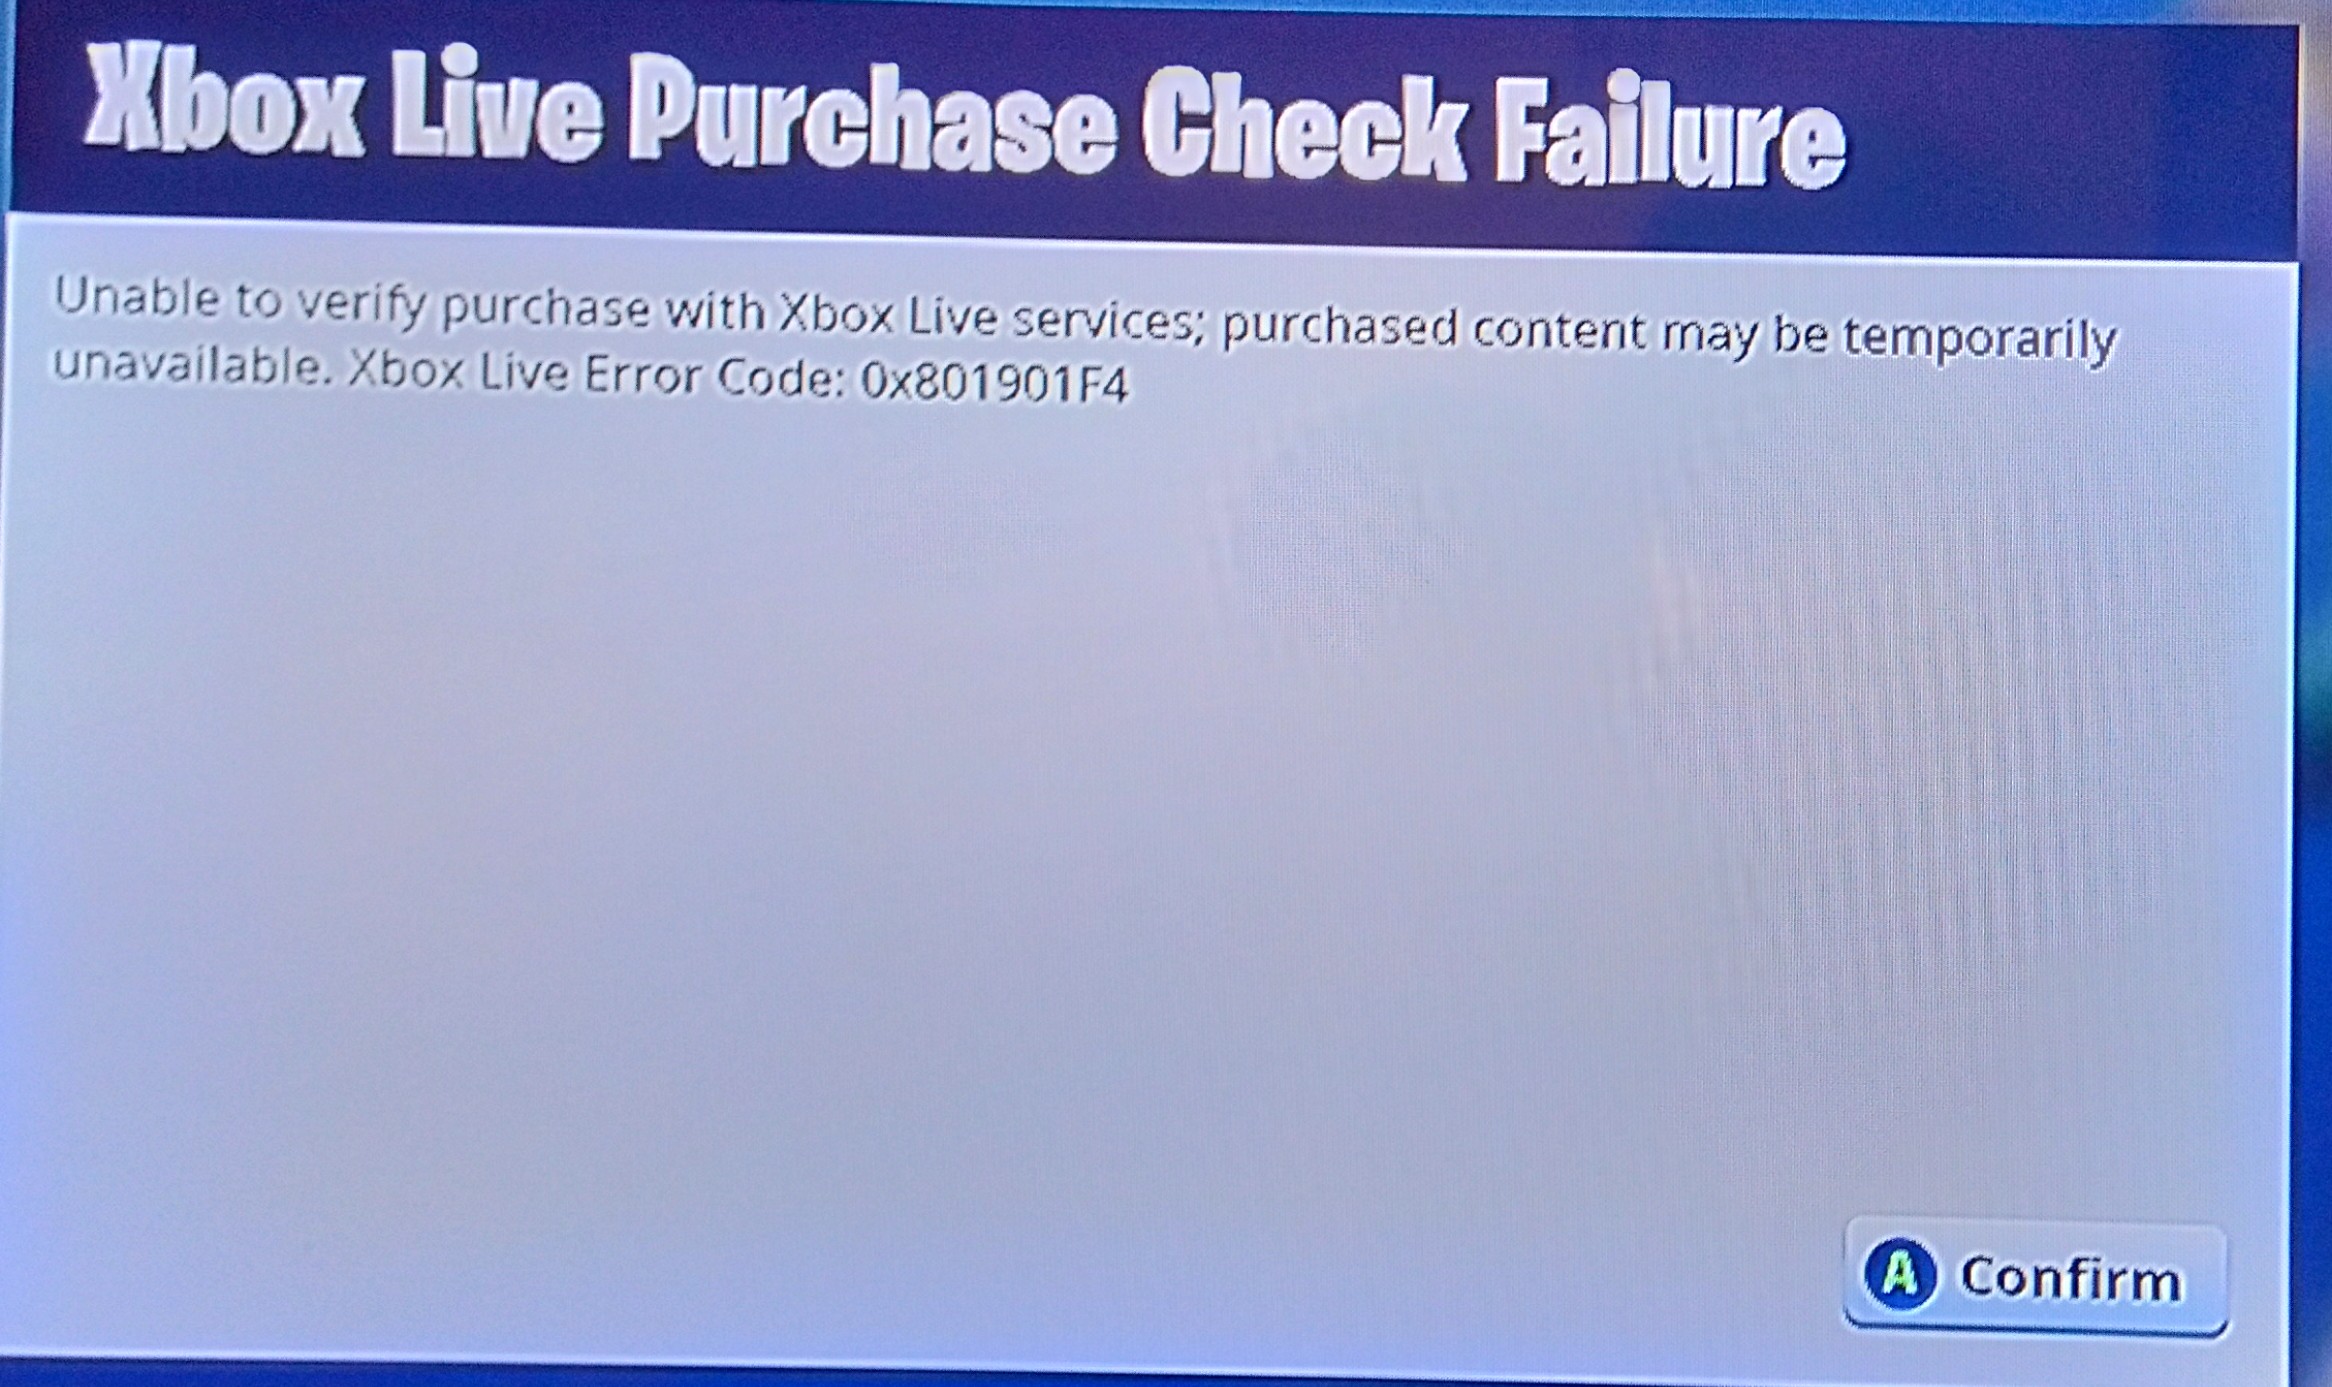 Why Have I Not Received My Promotional Vbucks With The 3 Month